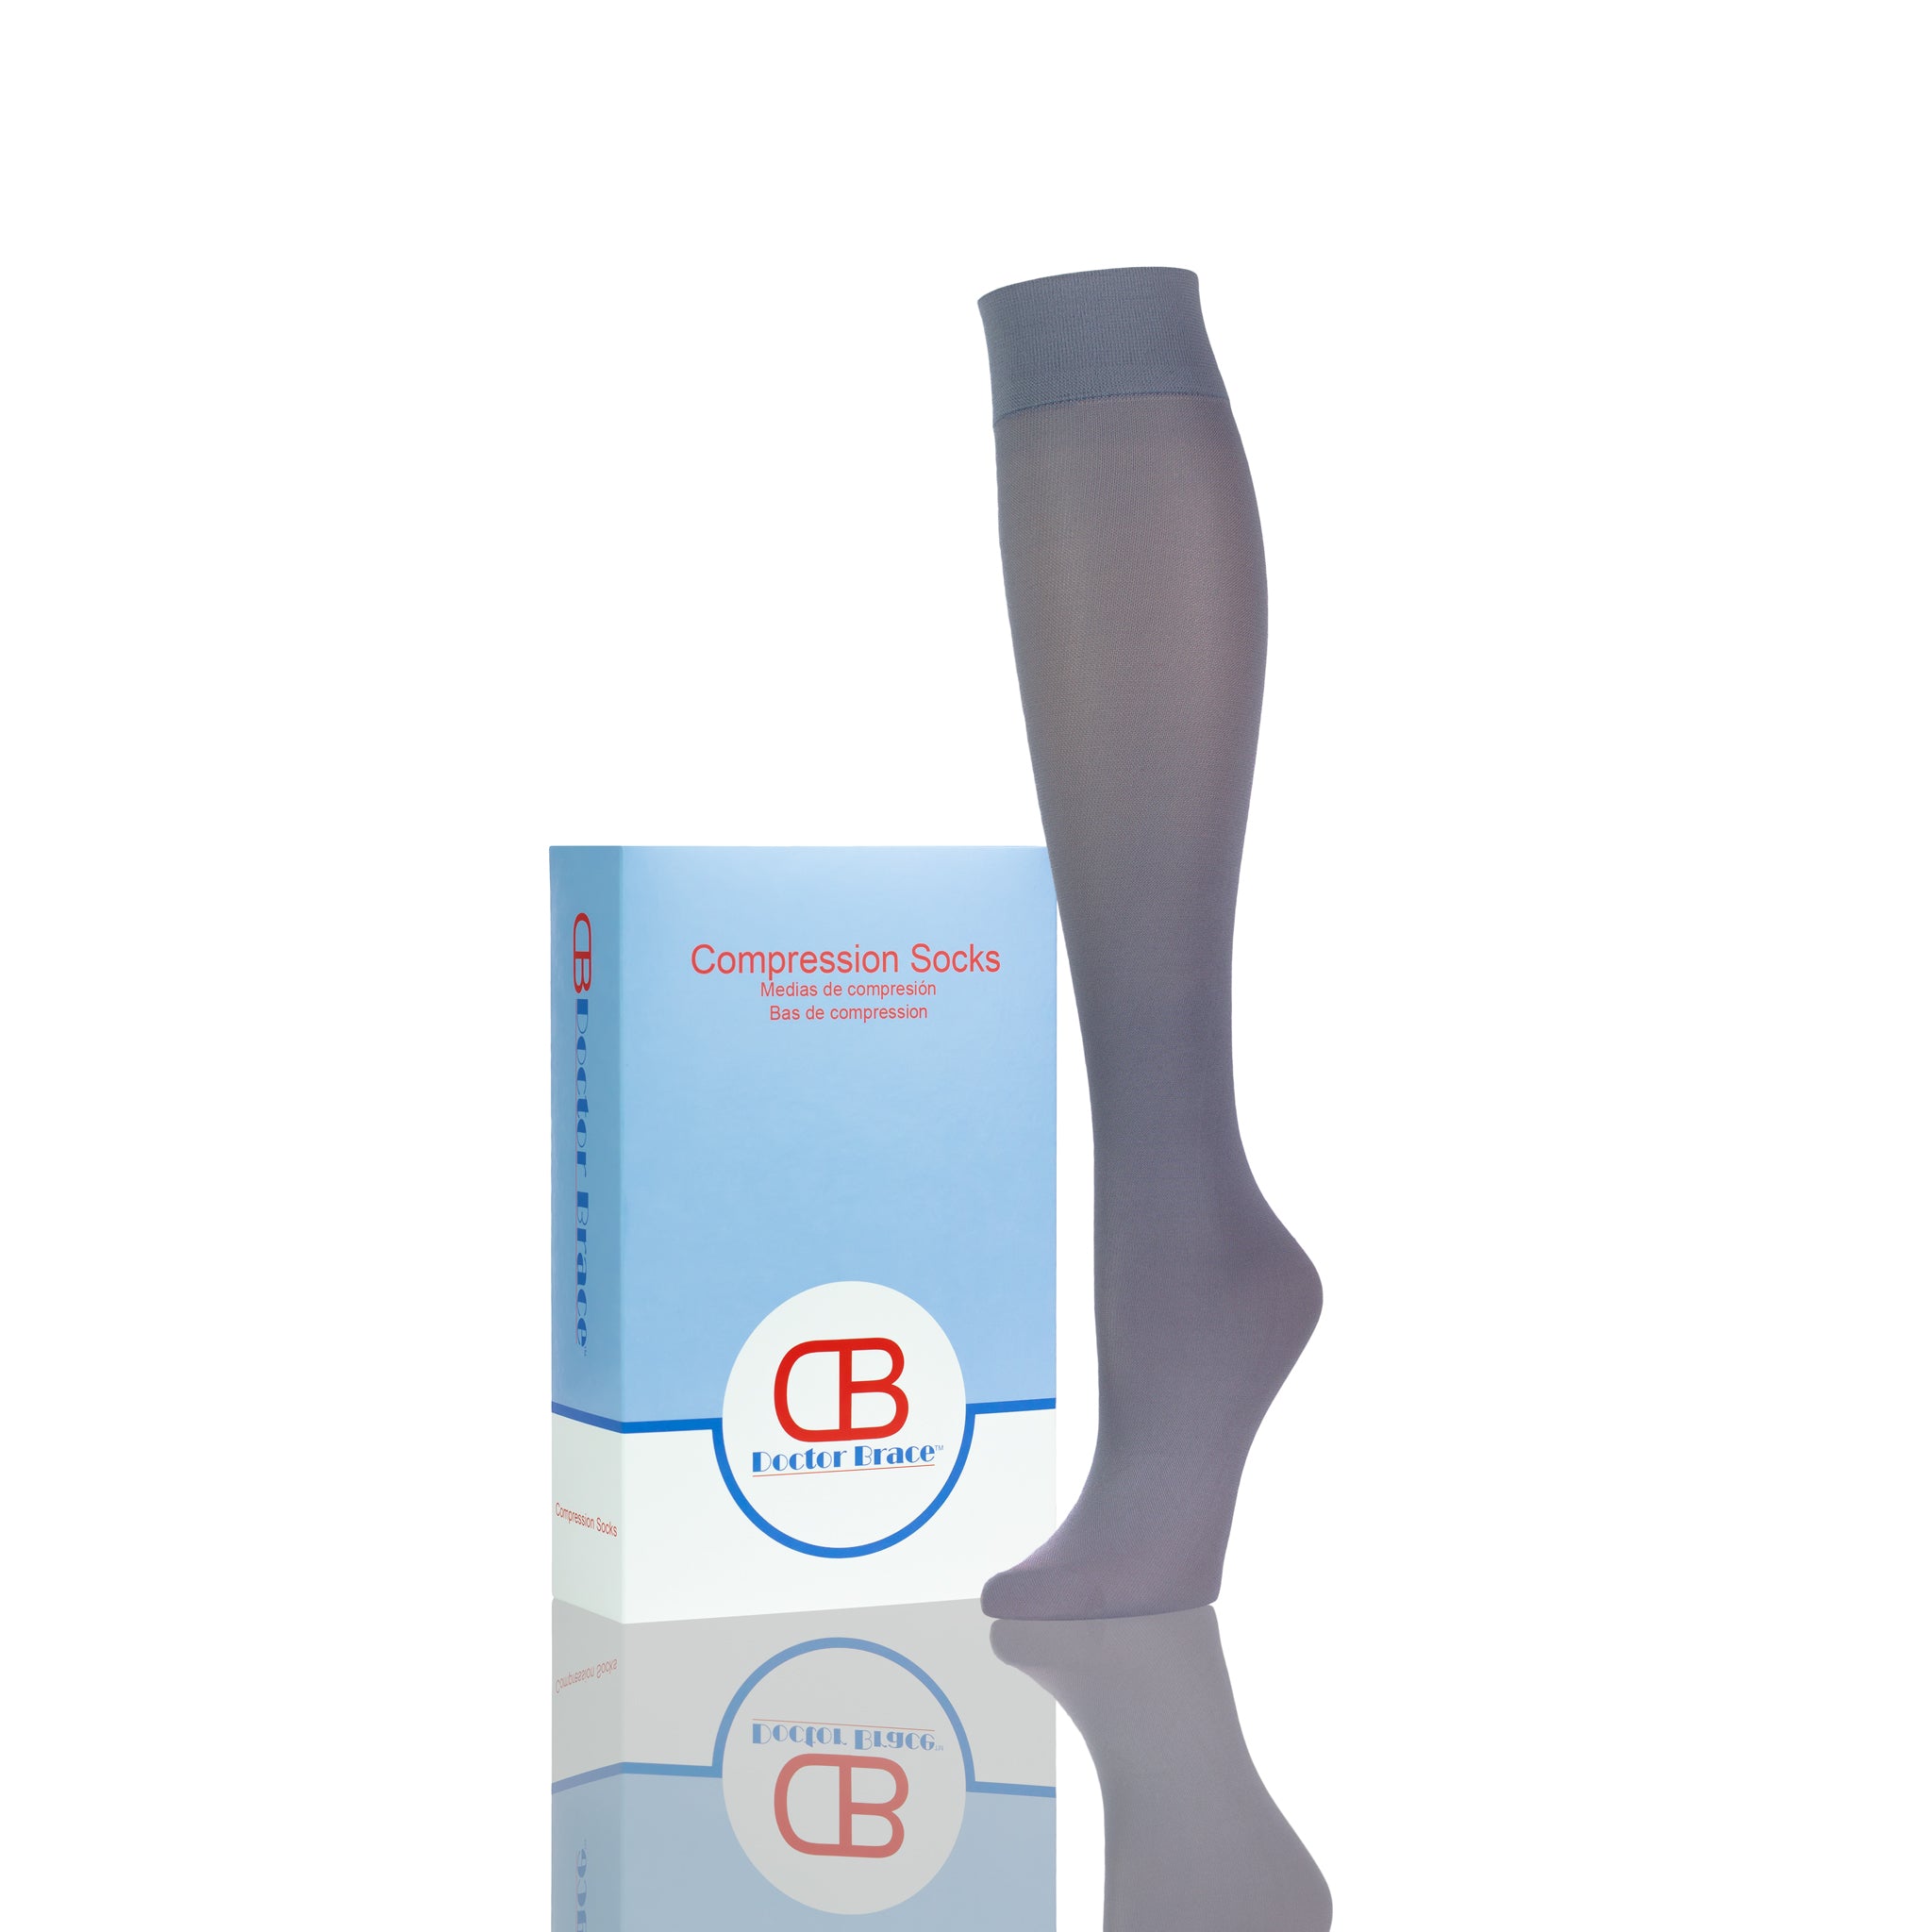 Womens Compression Socks - Light Gray - With Doctor Brace Softmedi Packaging